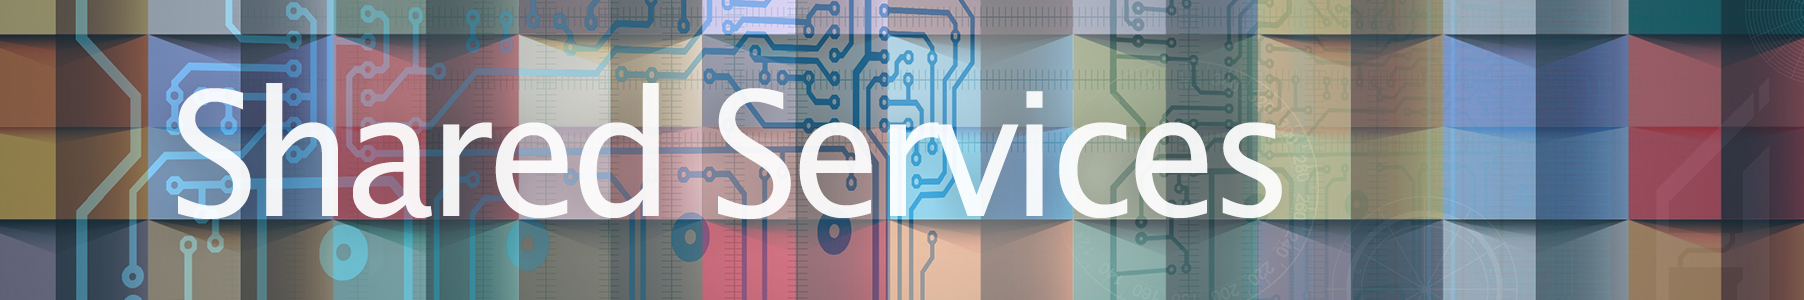 Shared Services banner graphic